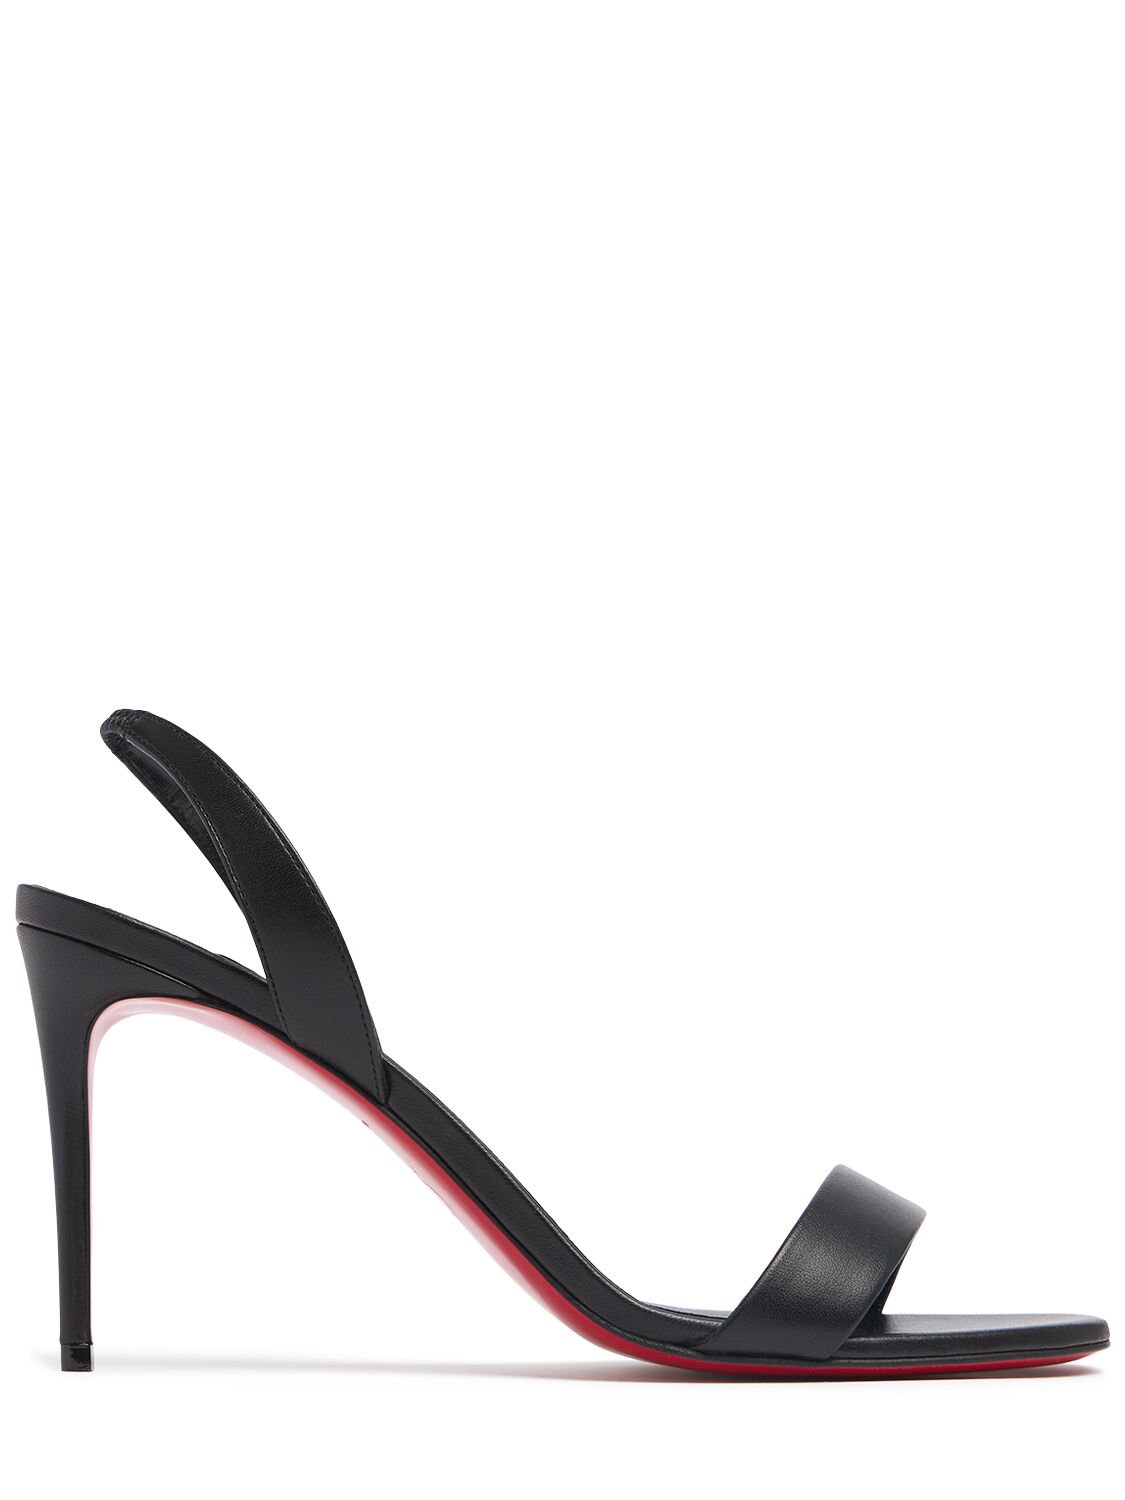 Christian Louboutin 85mm O Marylin Nappa Leather Sandals In Black